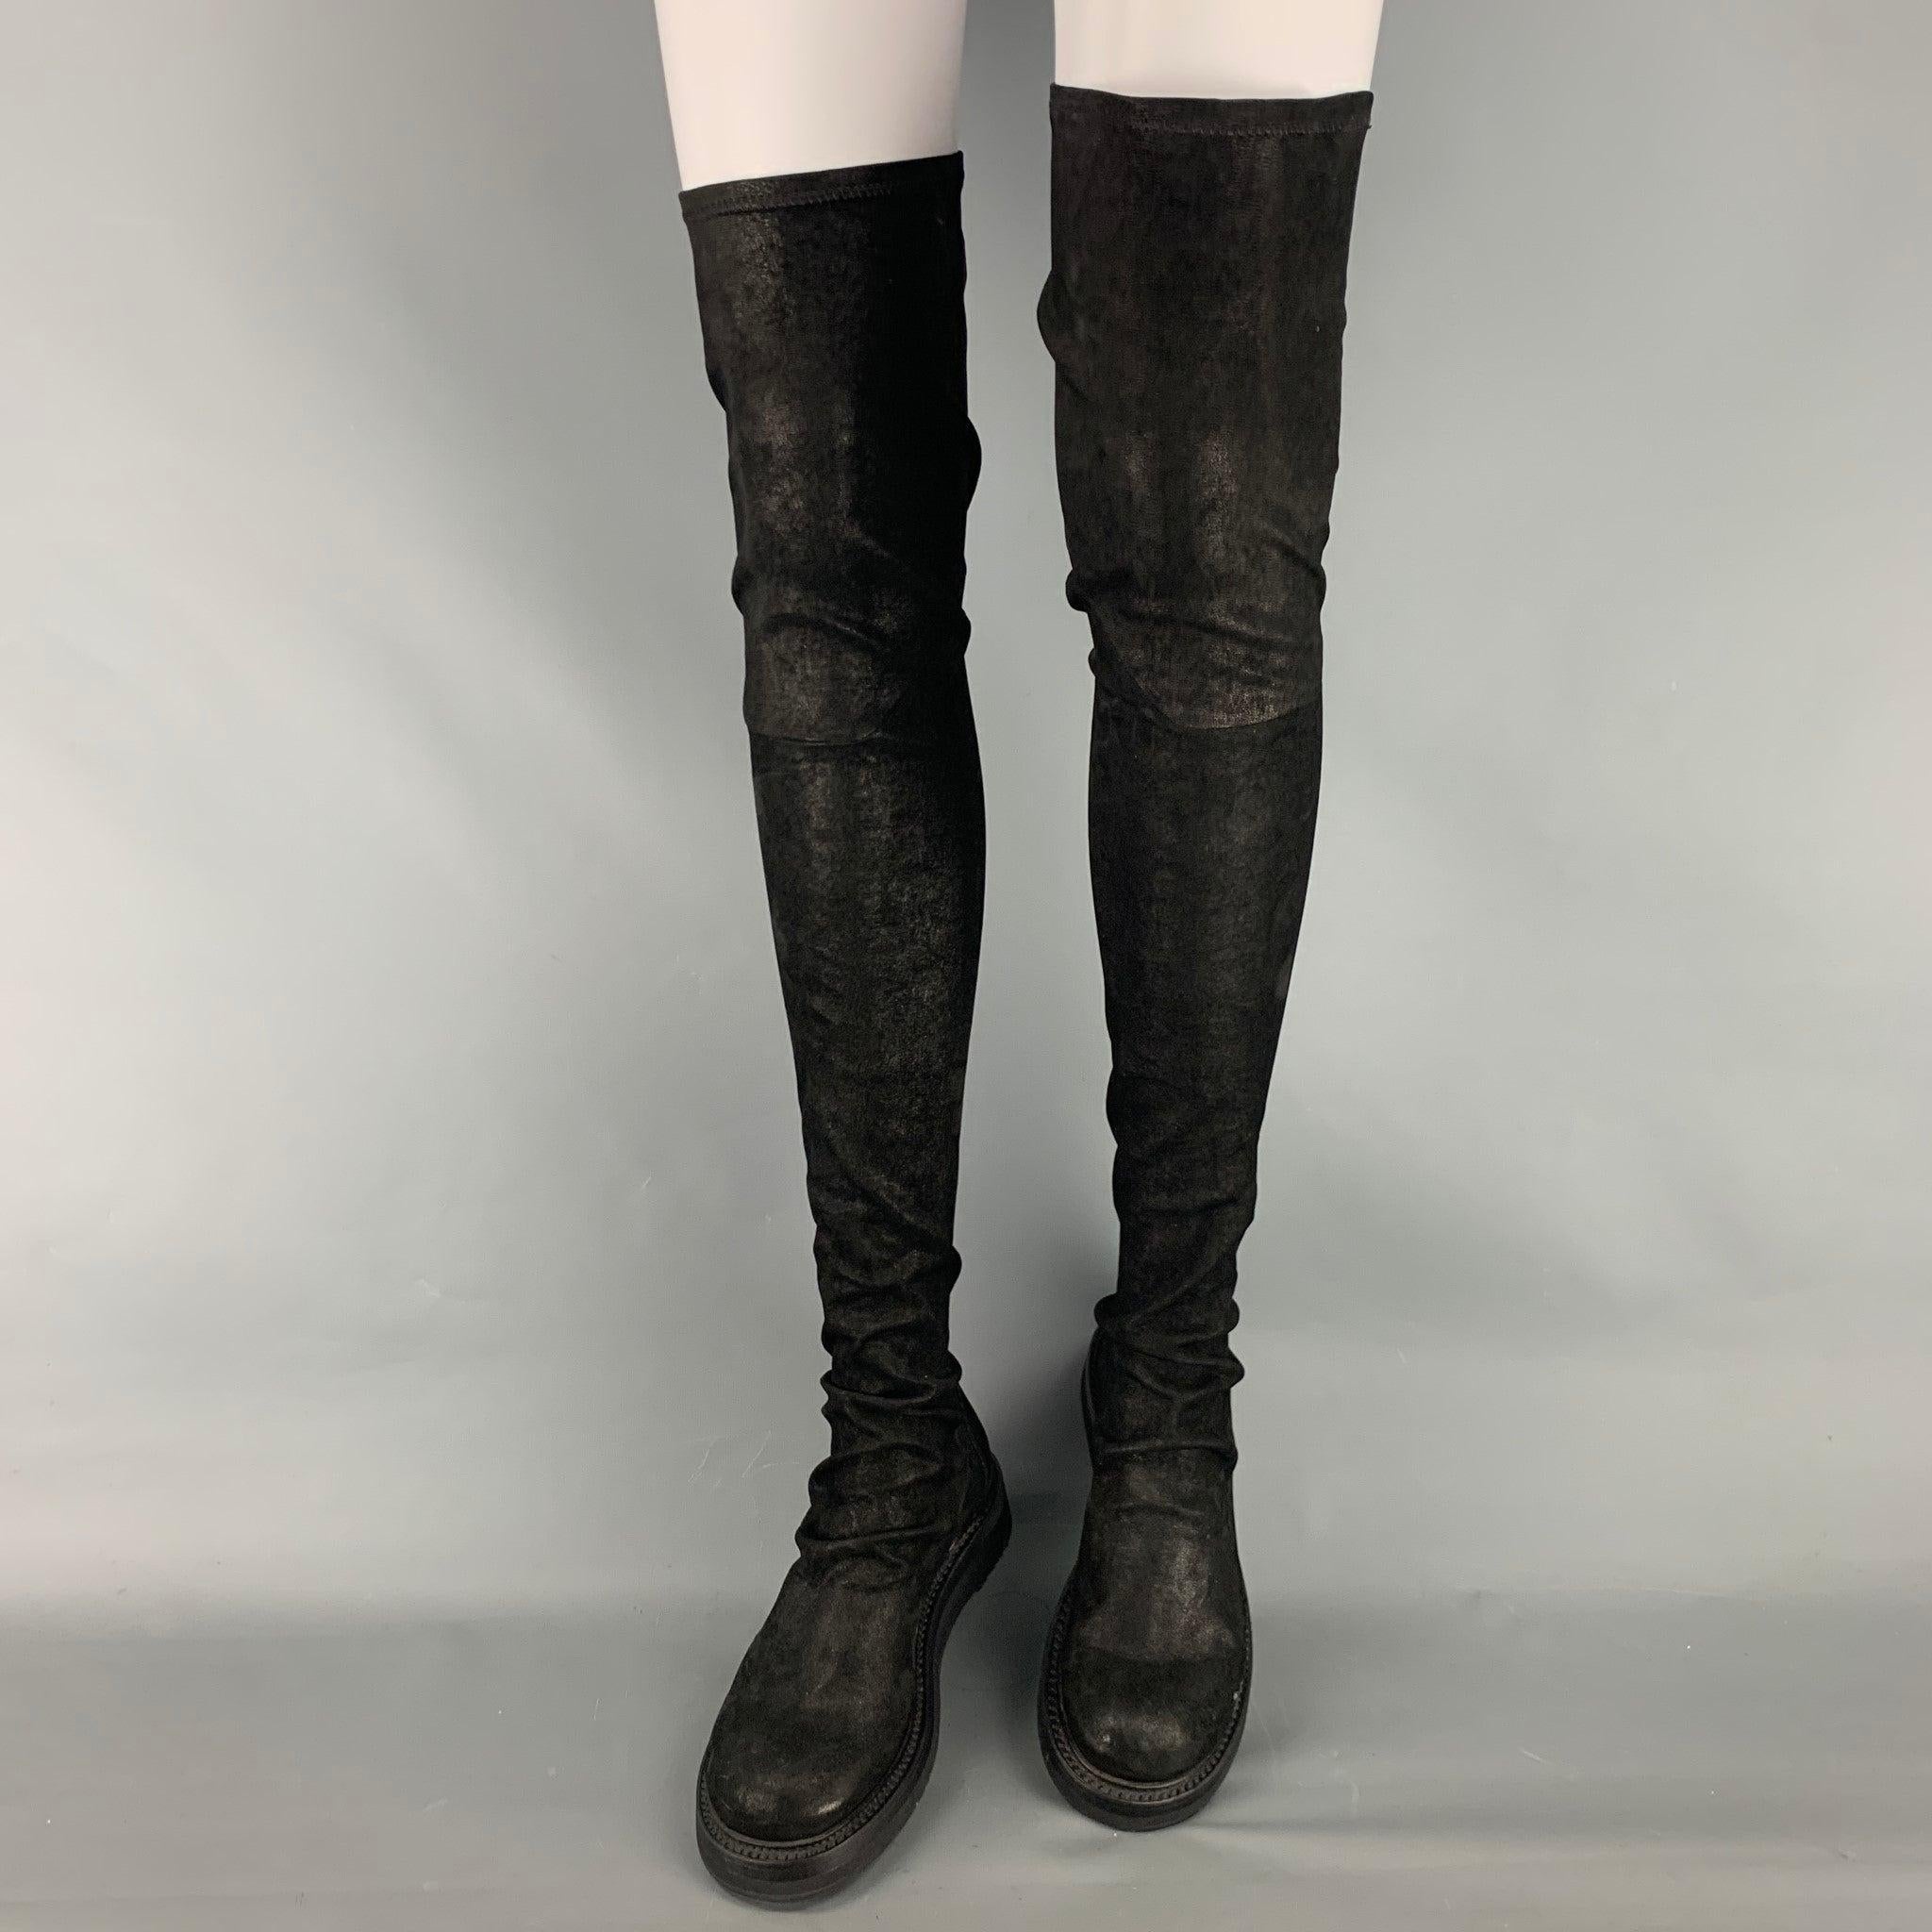 RICK OWENS
boots comes in a black lamb skin leather featuring an over-the-knee style, round toe, pull on, and a rubber sole. Made in Italy.Very Good Pre-Owned Condition. Minor signs of wear. 

Marked:   37 

Measurements: 
  Length: 10.75 inches